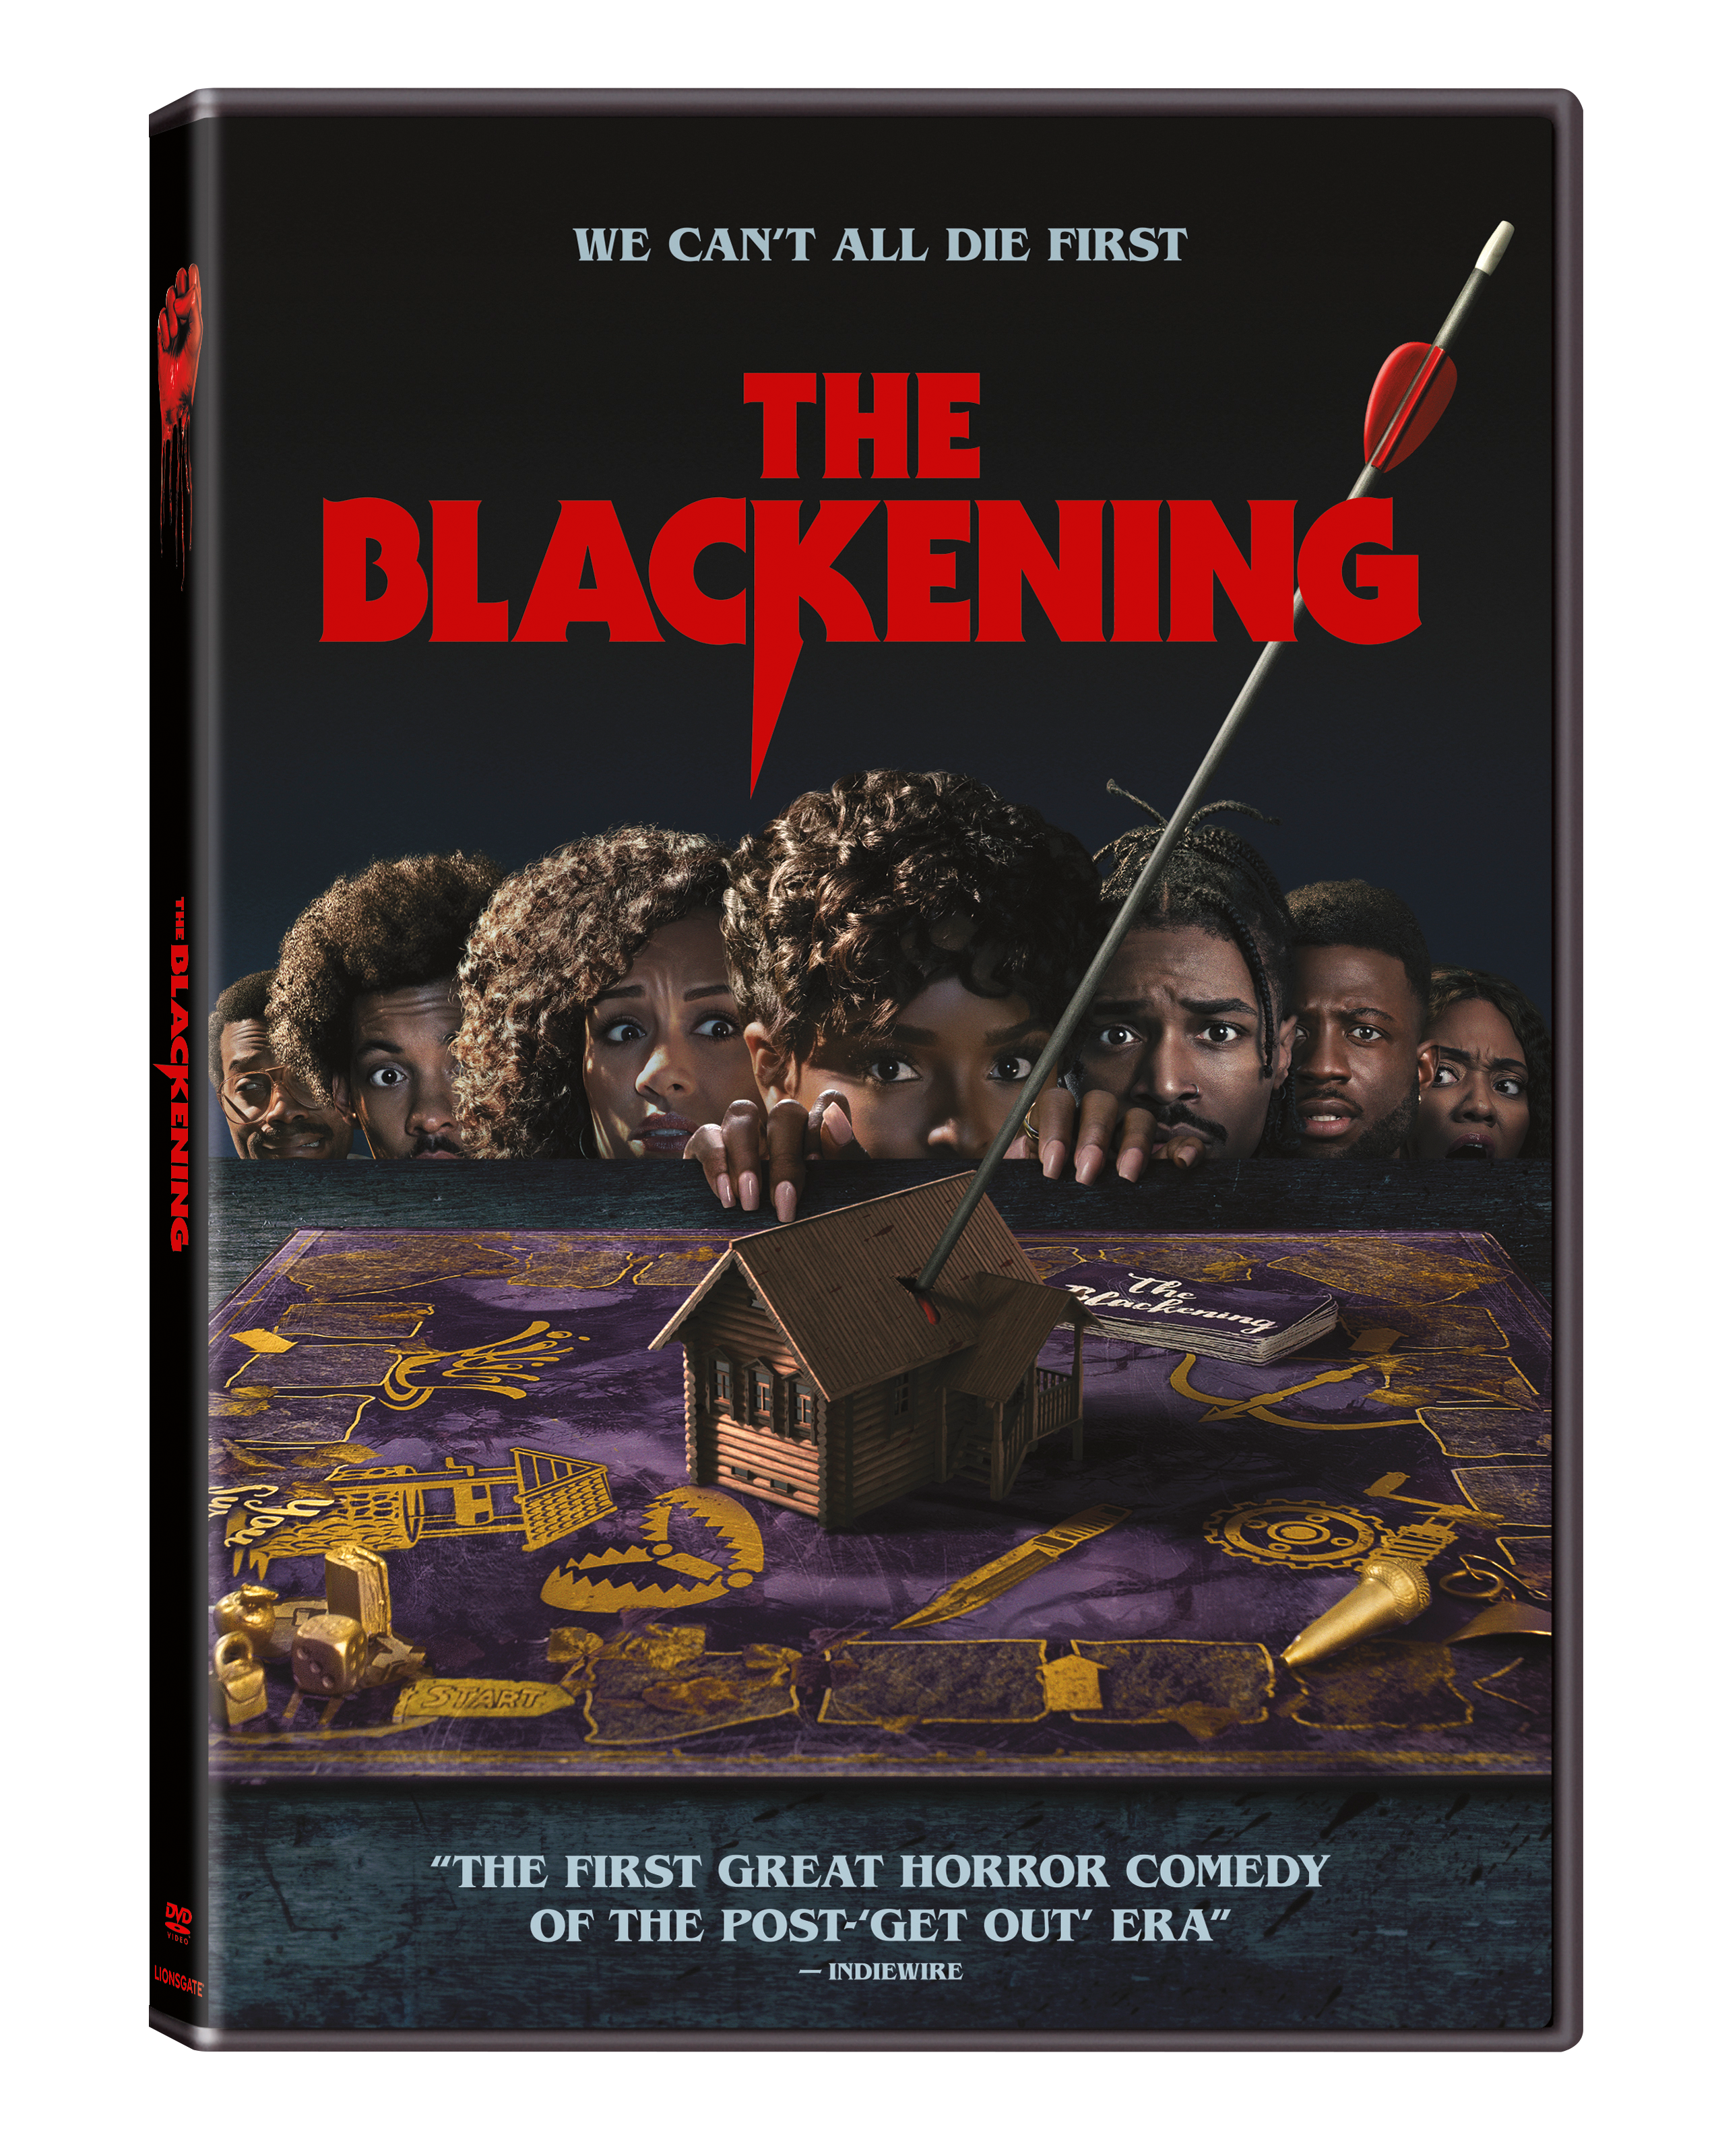 The Blackening DVD cover (Lionsgate)